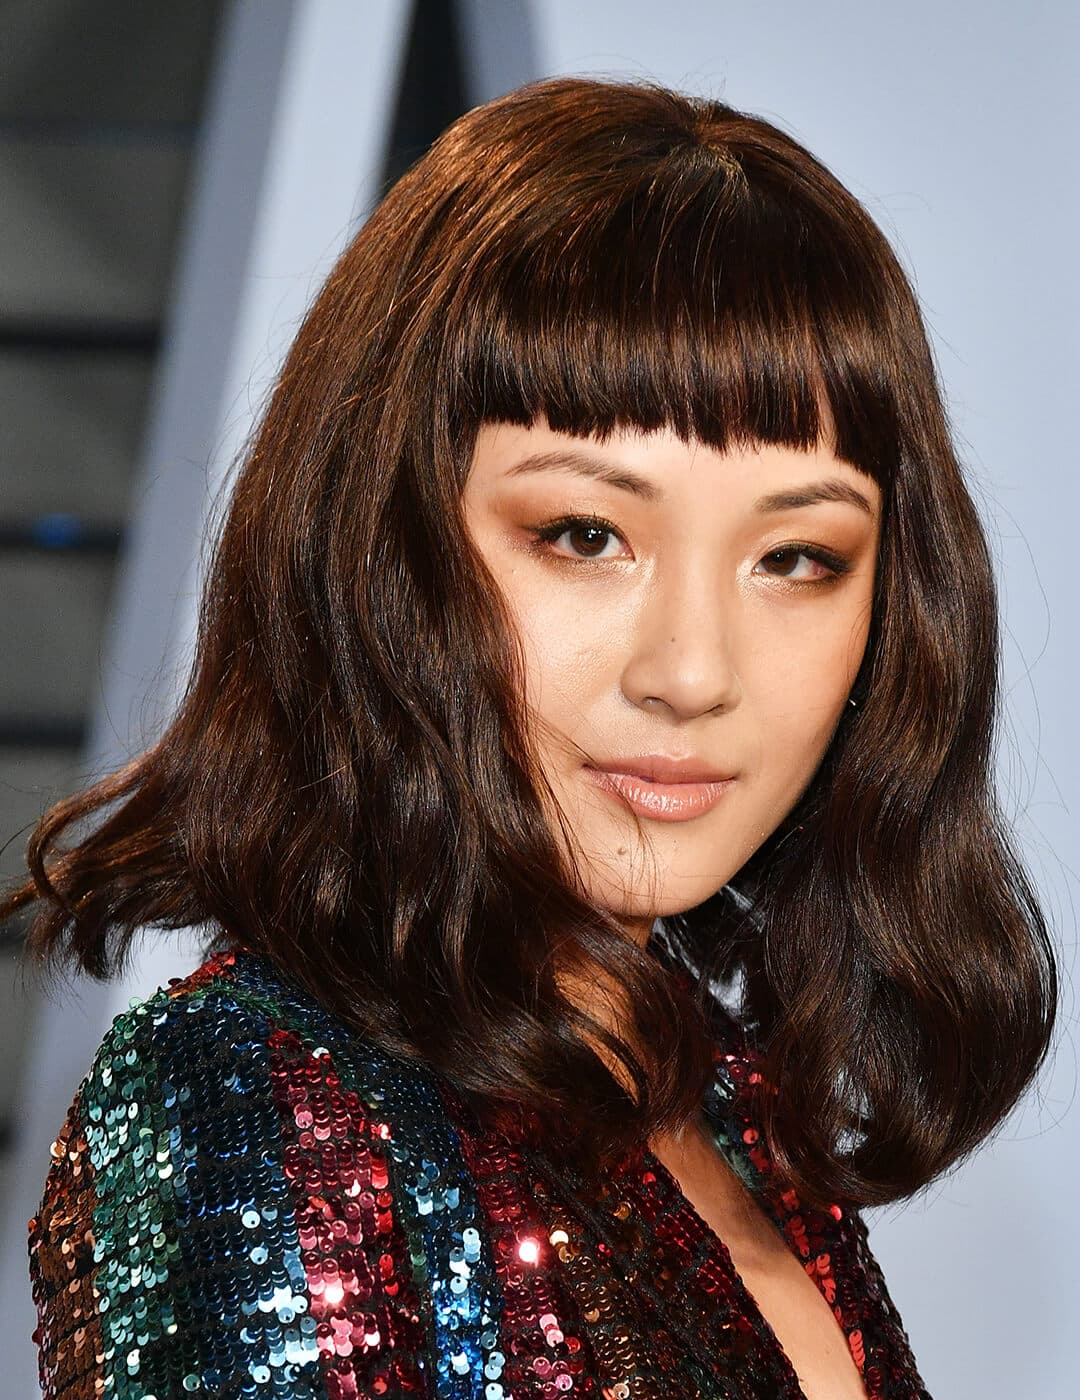 Constance Wu looking chic in a wavy hairstyle with bangs and colorful sequined dress